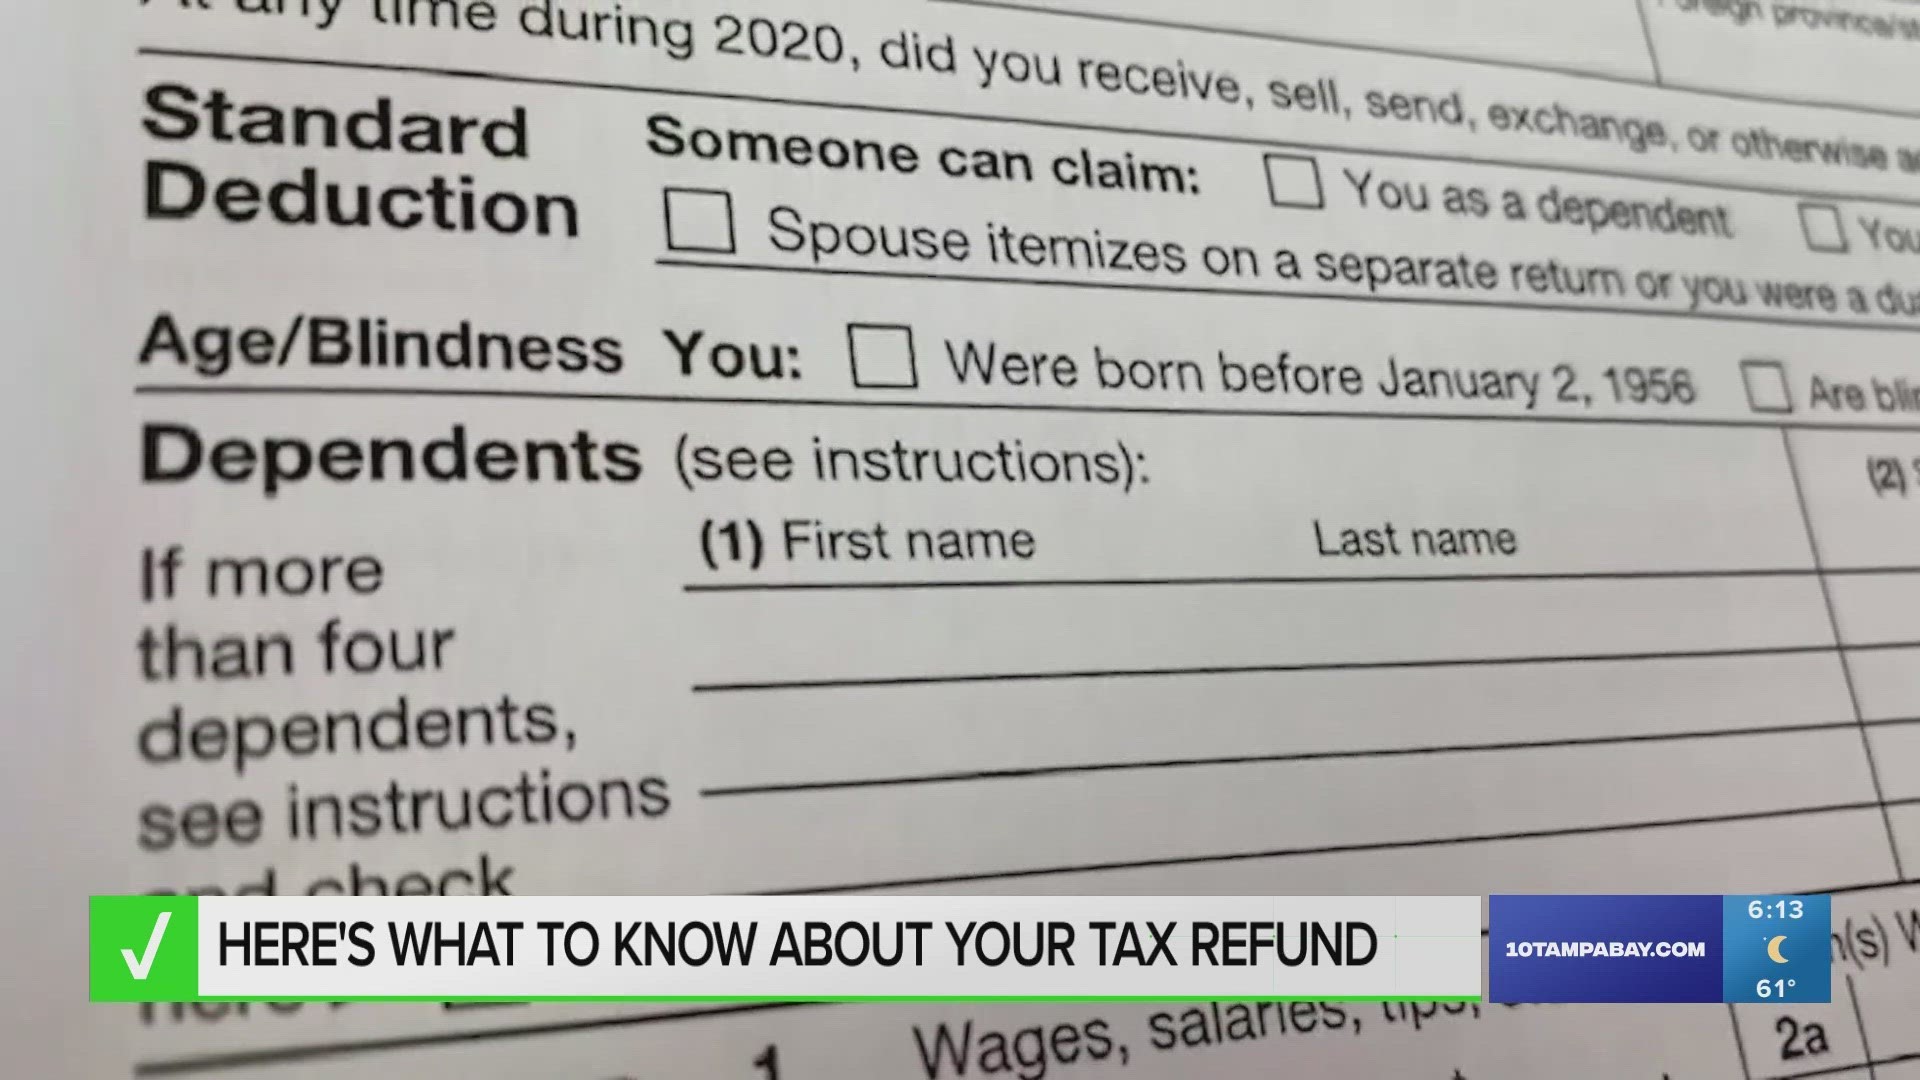 With tax filing season underway, here’s what to know about refunds, credits, and filing options.